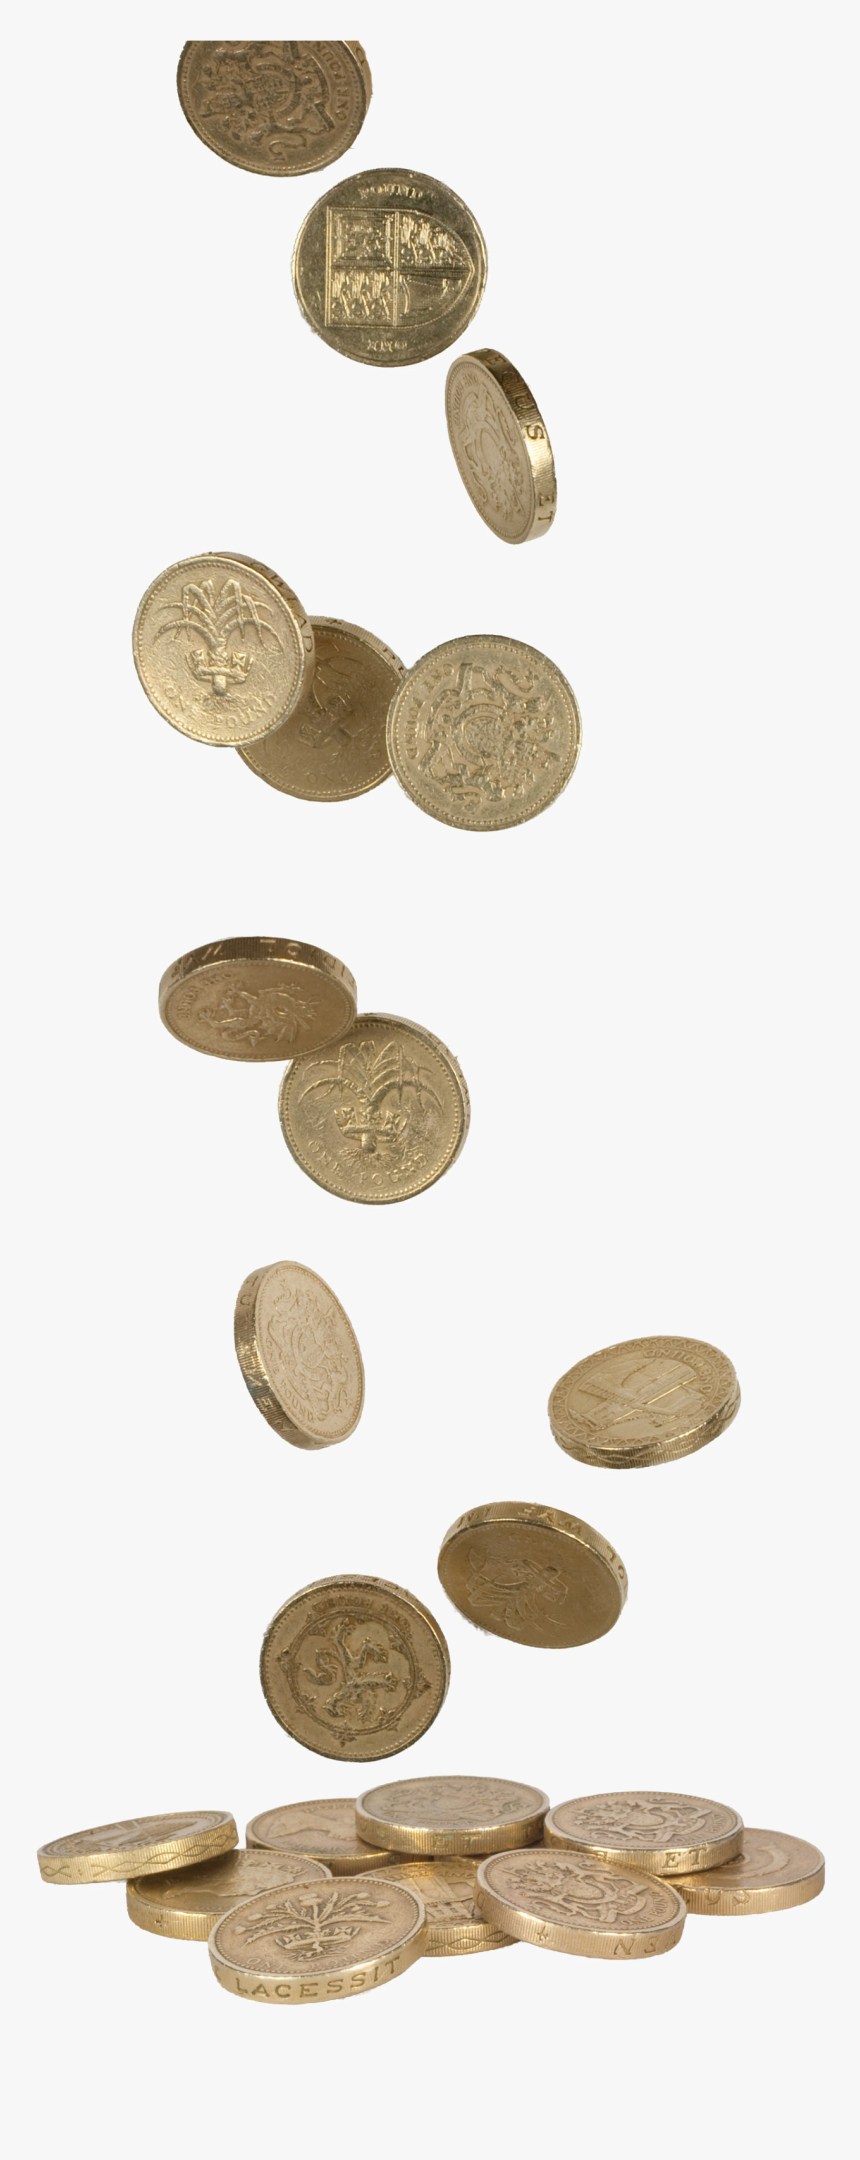 Falling Coins Png, Transparent Png, Free Download